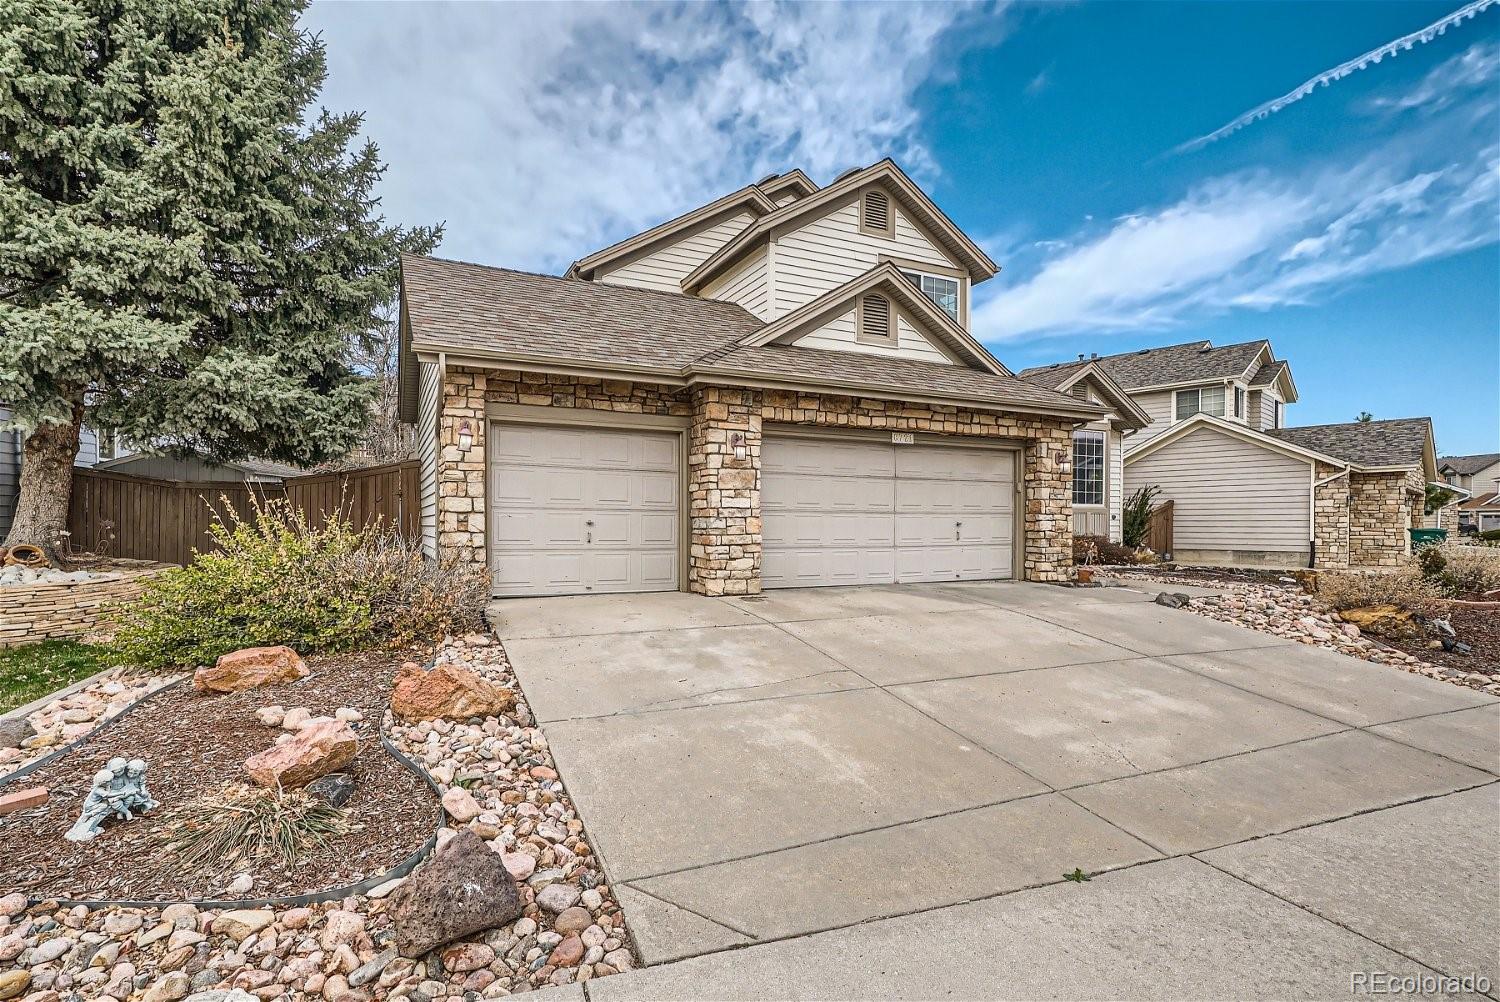 Report Image for 8721  Aberdeen Circle,Highlands Ranch, Colorado